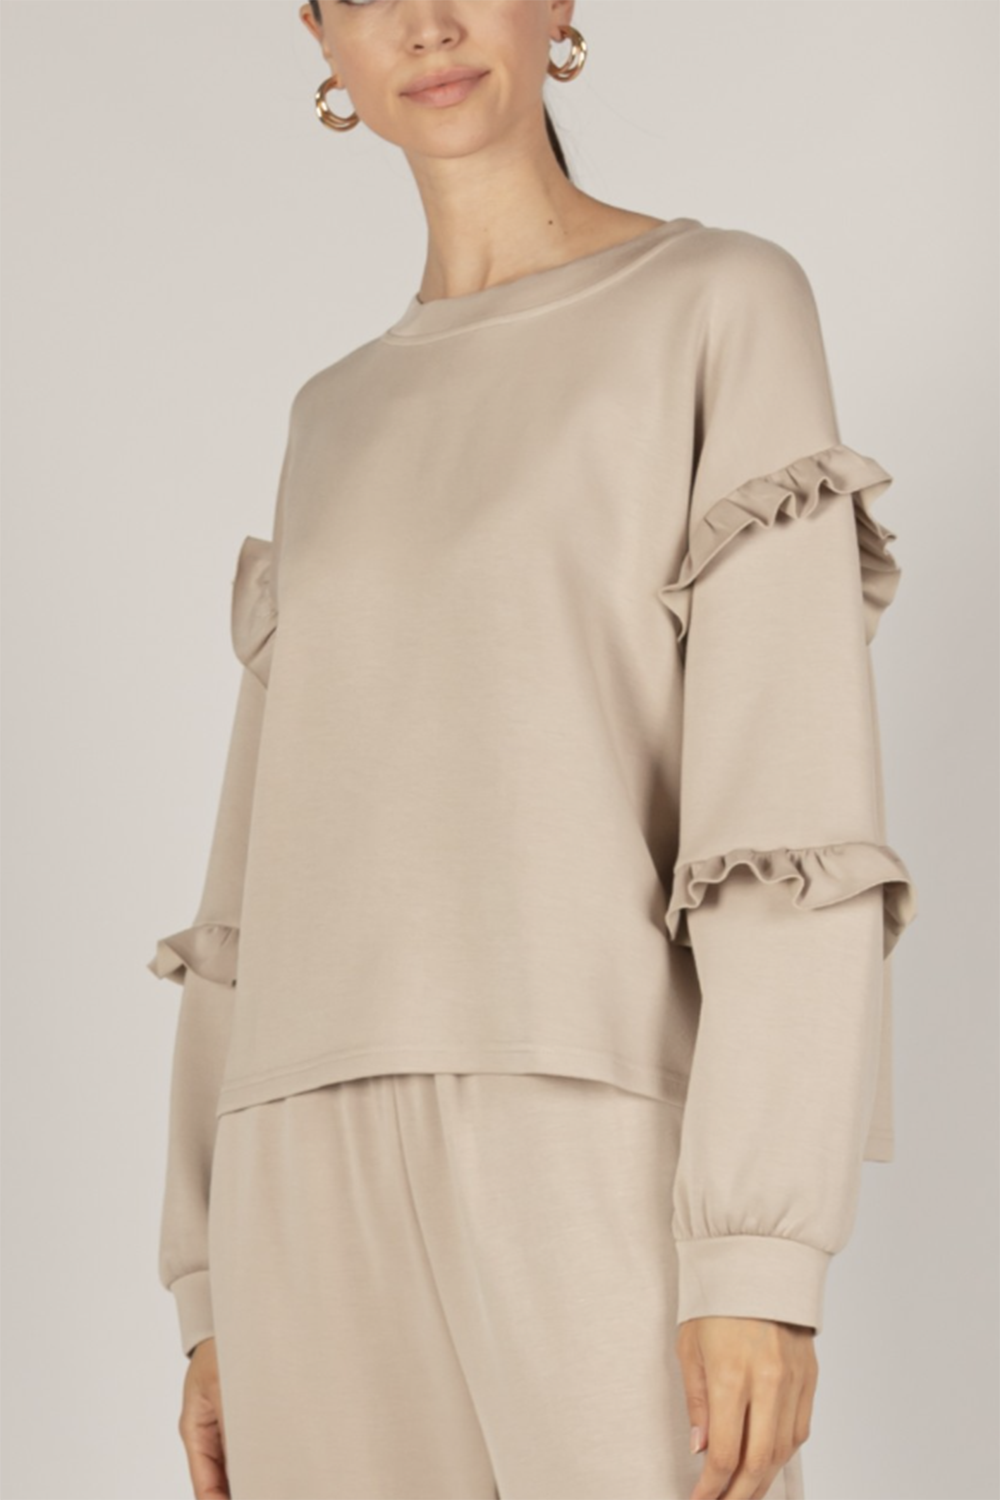 Butter Modal Long Sleeve Ruffled Top - Taupe